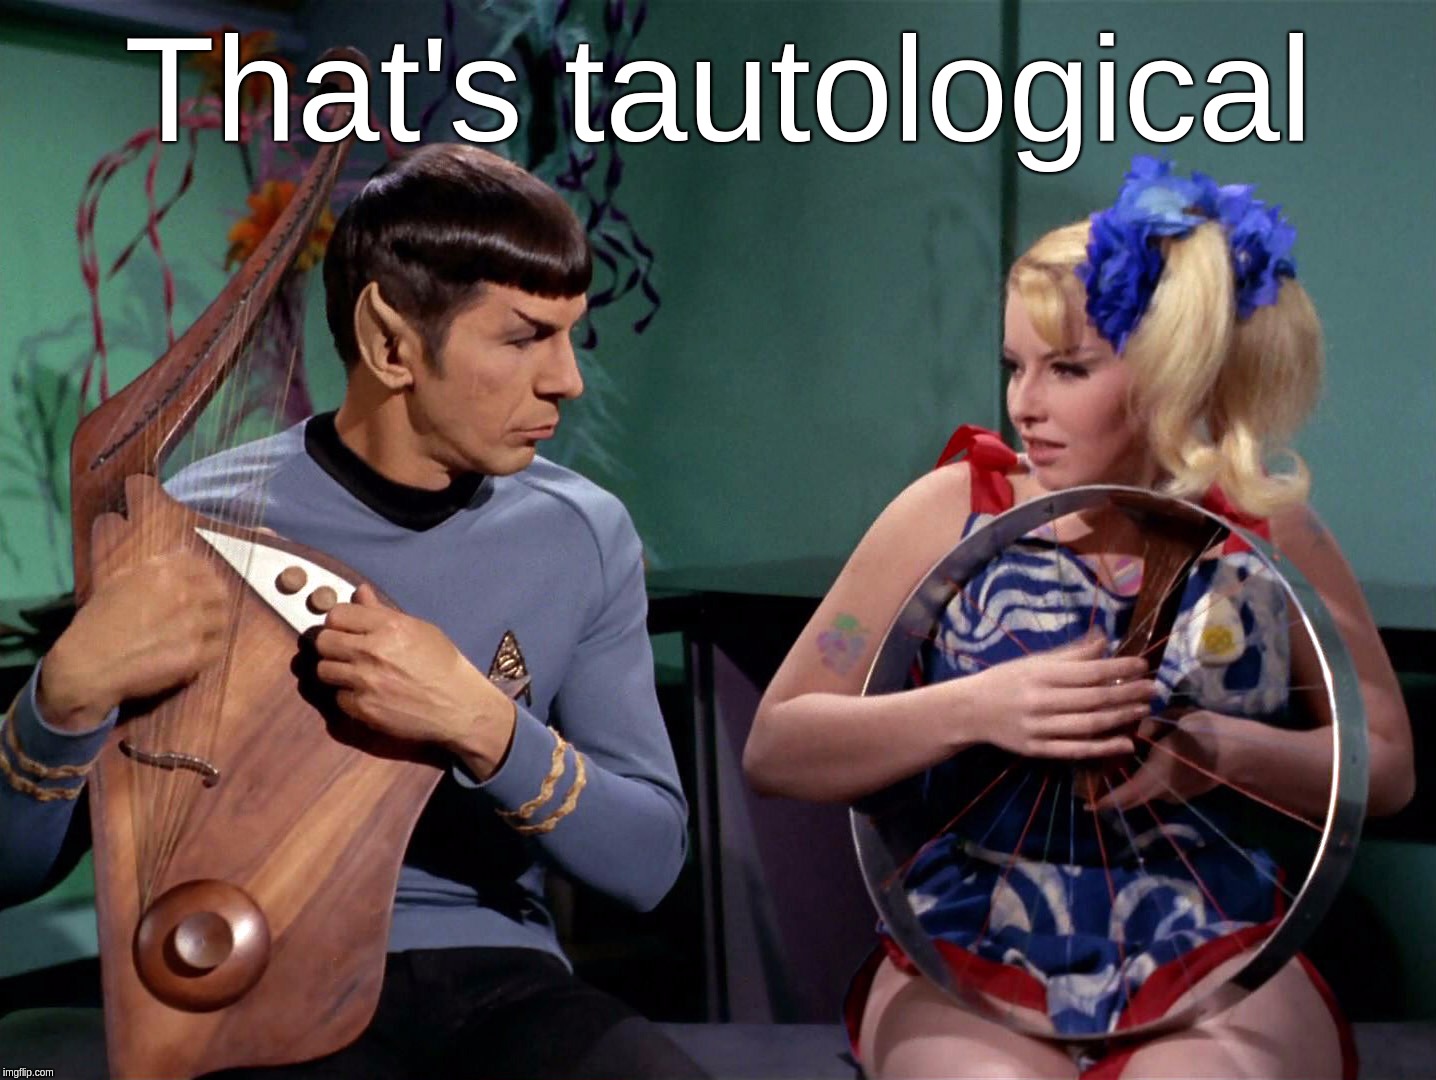 That's tautological | That's tautological | image tagged in star,trek,spock,tautological,logical,illogical | made w/ Imgflip meme maker